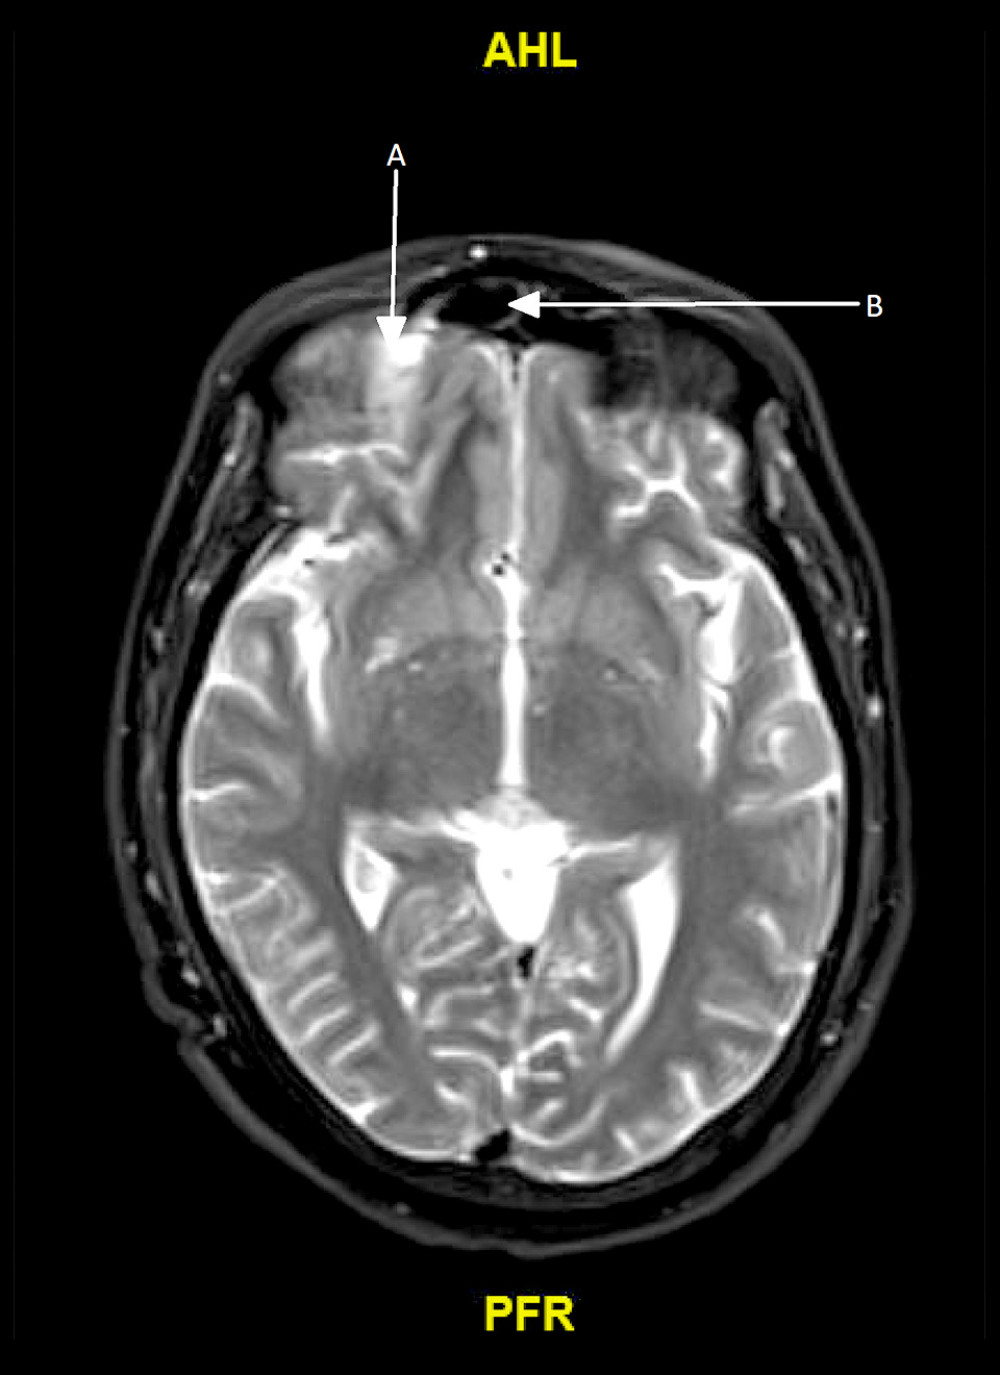 MRI with contrast, on admission. Right inferior frontal lobe T2/FLAIR hyperintensity with contrast enhancement (arrow A), immediately dorsal to the right frontal sinus (arrow B). There is associated leptomeningeal enhancement. Axial T2 fat-saturation (FS) gadoterate meglumine contrast.